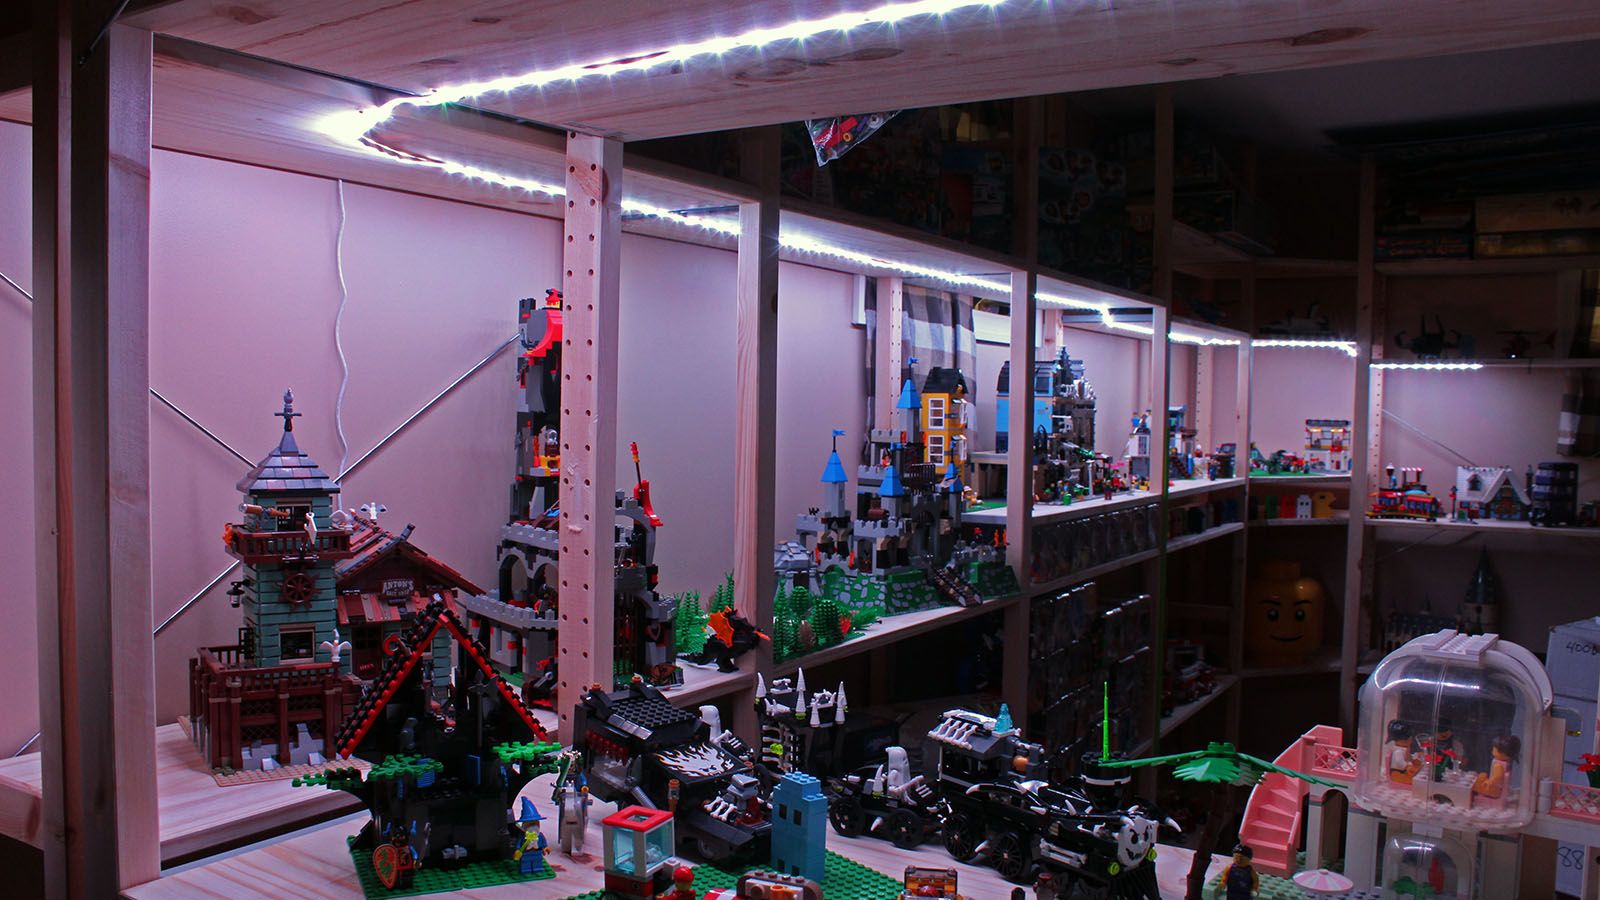 A long strip of white LEDs illuminating a dark room filled with Lego bricks.